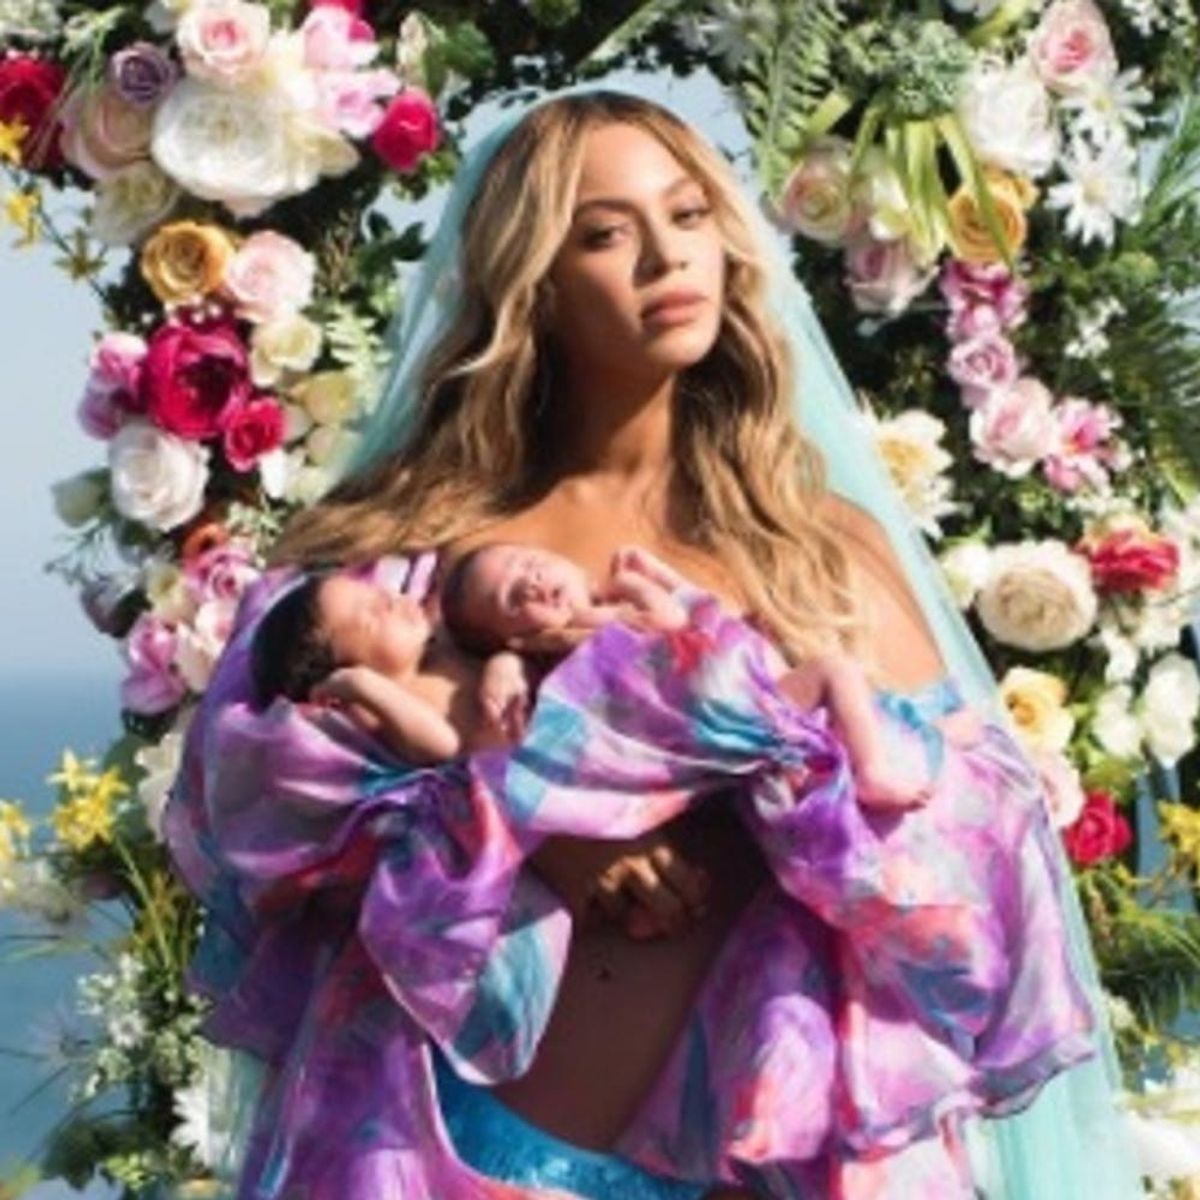 BREAKING: Beyoncé Just Made the Lion King Remake Announcement of Everyone’s Dreams